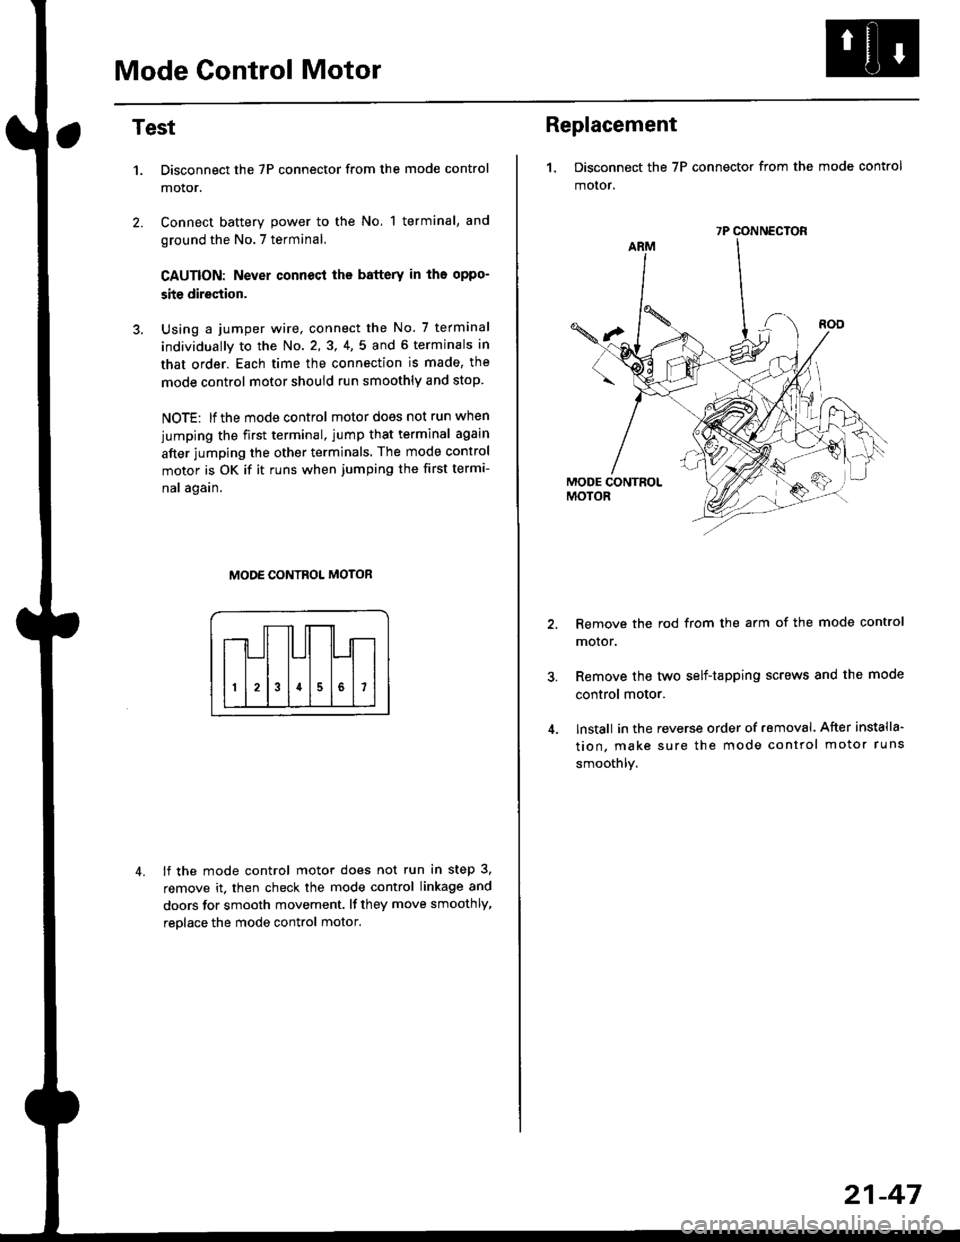 HONDA CIVIC 1997 6.G Workshop Manual Mode Control Motor
2.
Test
1.
4.
Disconnect the 7P connector from the mode control
motor.
Connect battery power to the No, 1 terminal, and
ground the No.7 terminal,
CAUTION: Never connecl the battery 